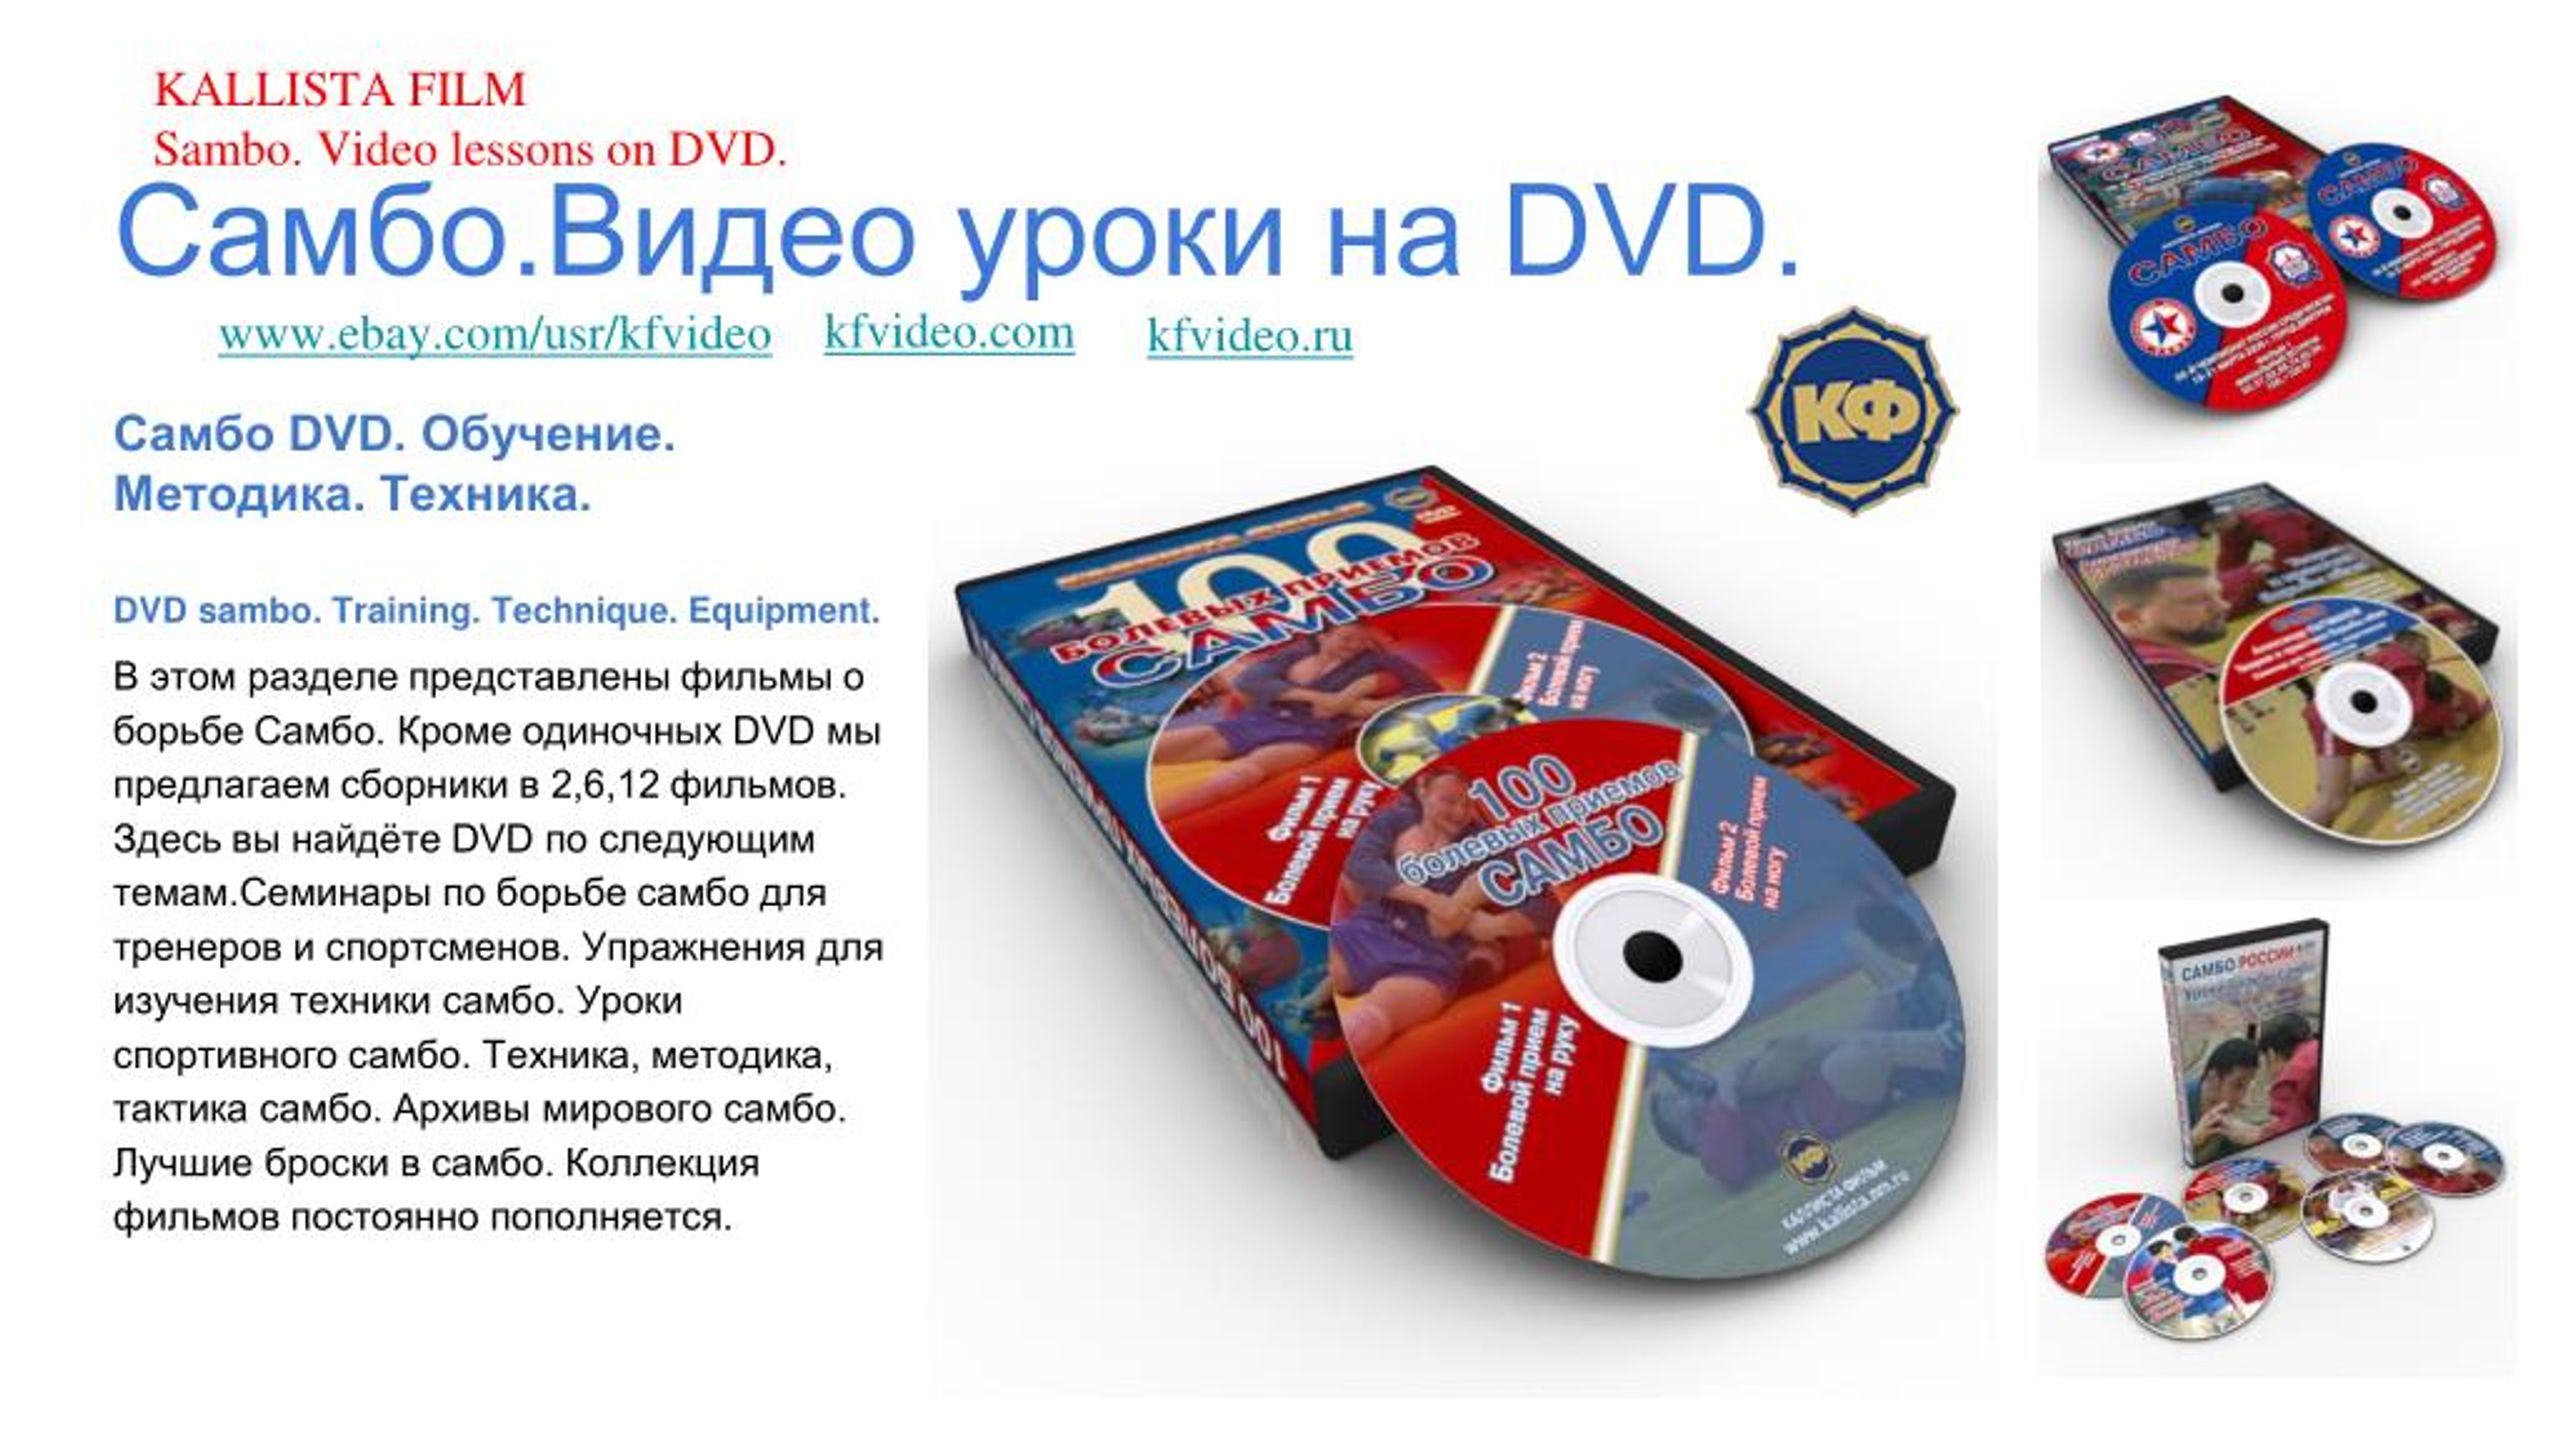 Ppt Judo Sambo Video Lessons On Dvd Posters Powerpoint Presentation Id